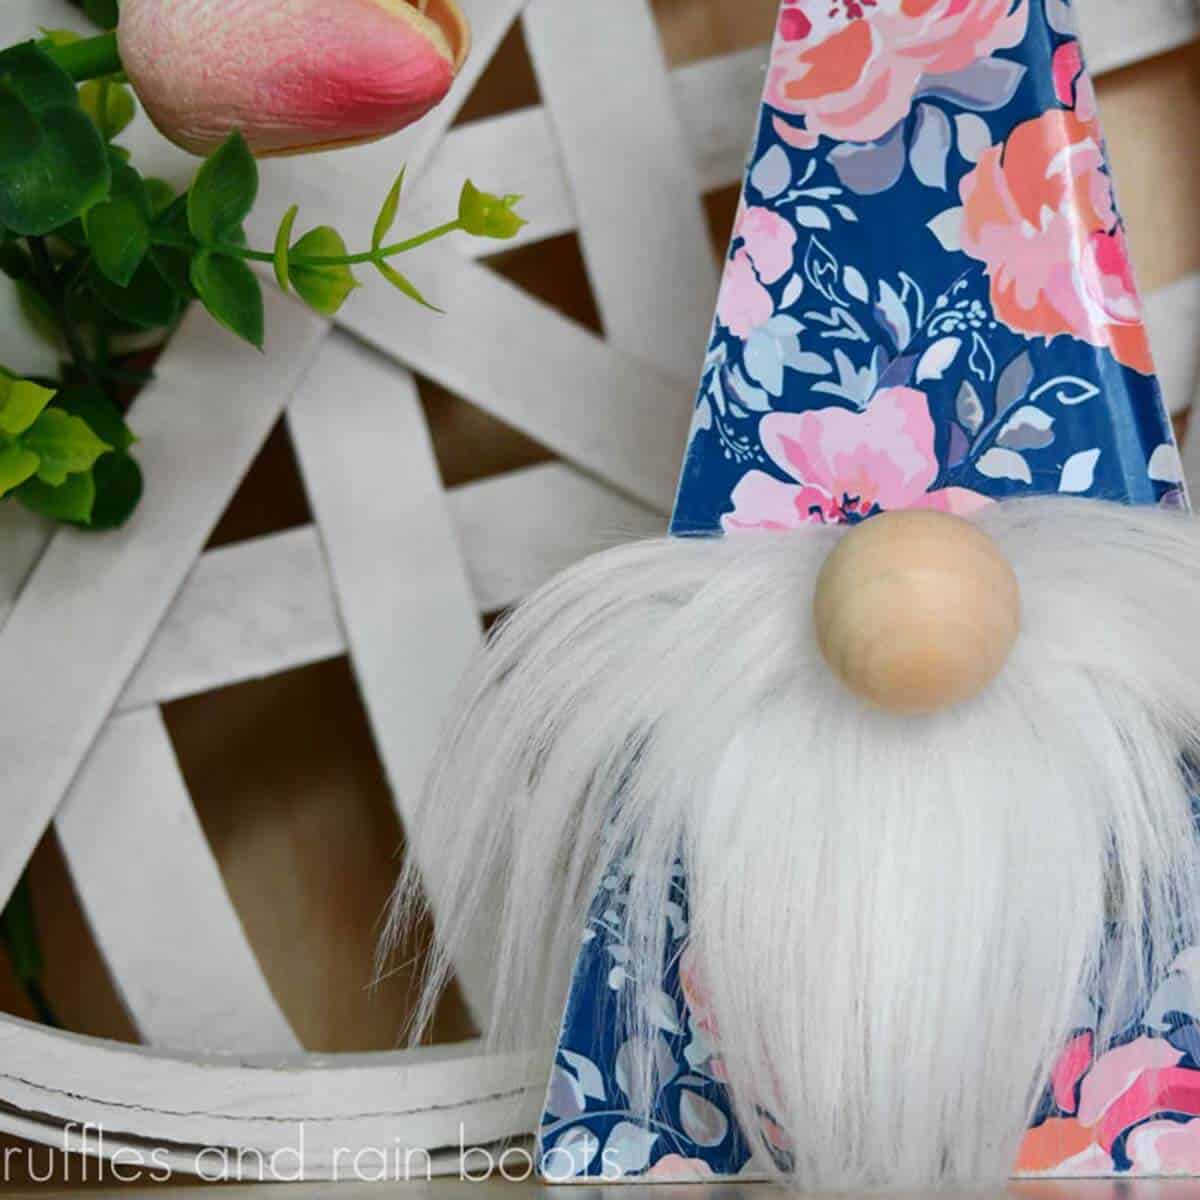 Square close up image of a triangle Spring wood gnome with white fur and wood nose in front of a tulip and white tobacco basket.